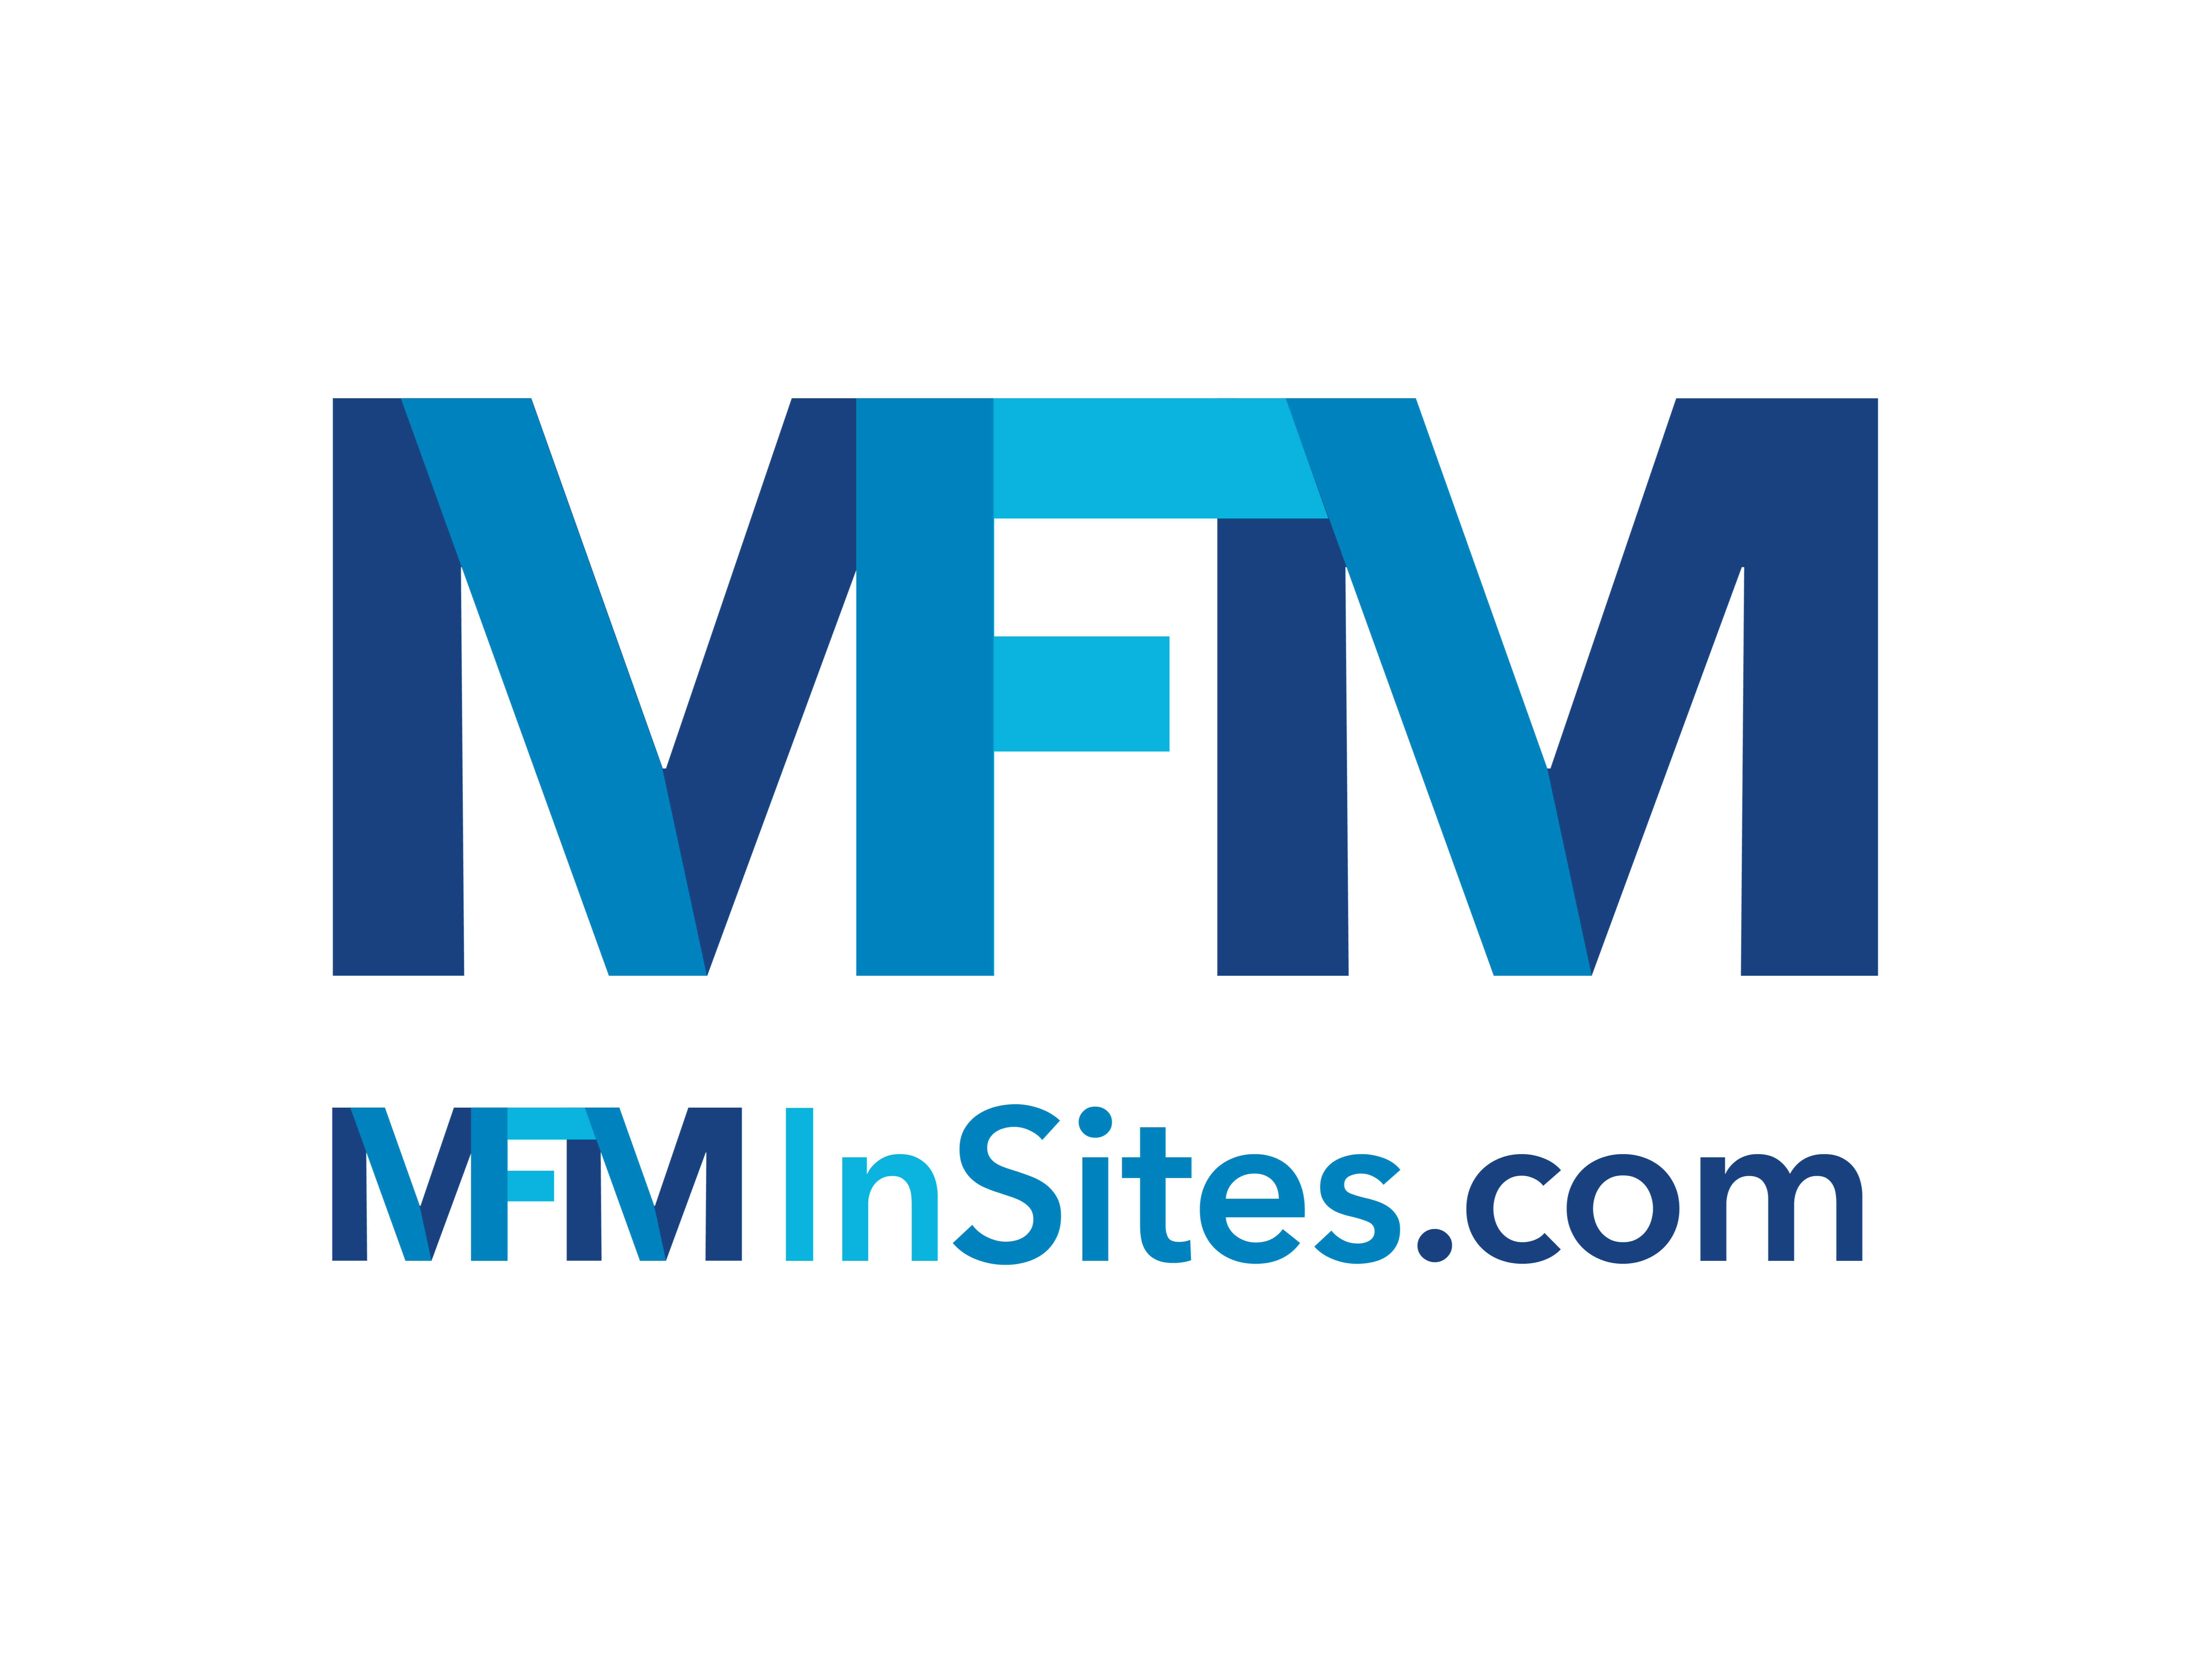 Cover image for  article: Media Financial Management Association and MediaVillage Partner to Launch MFMInSites.com